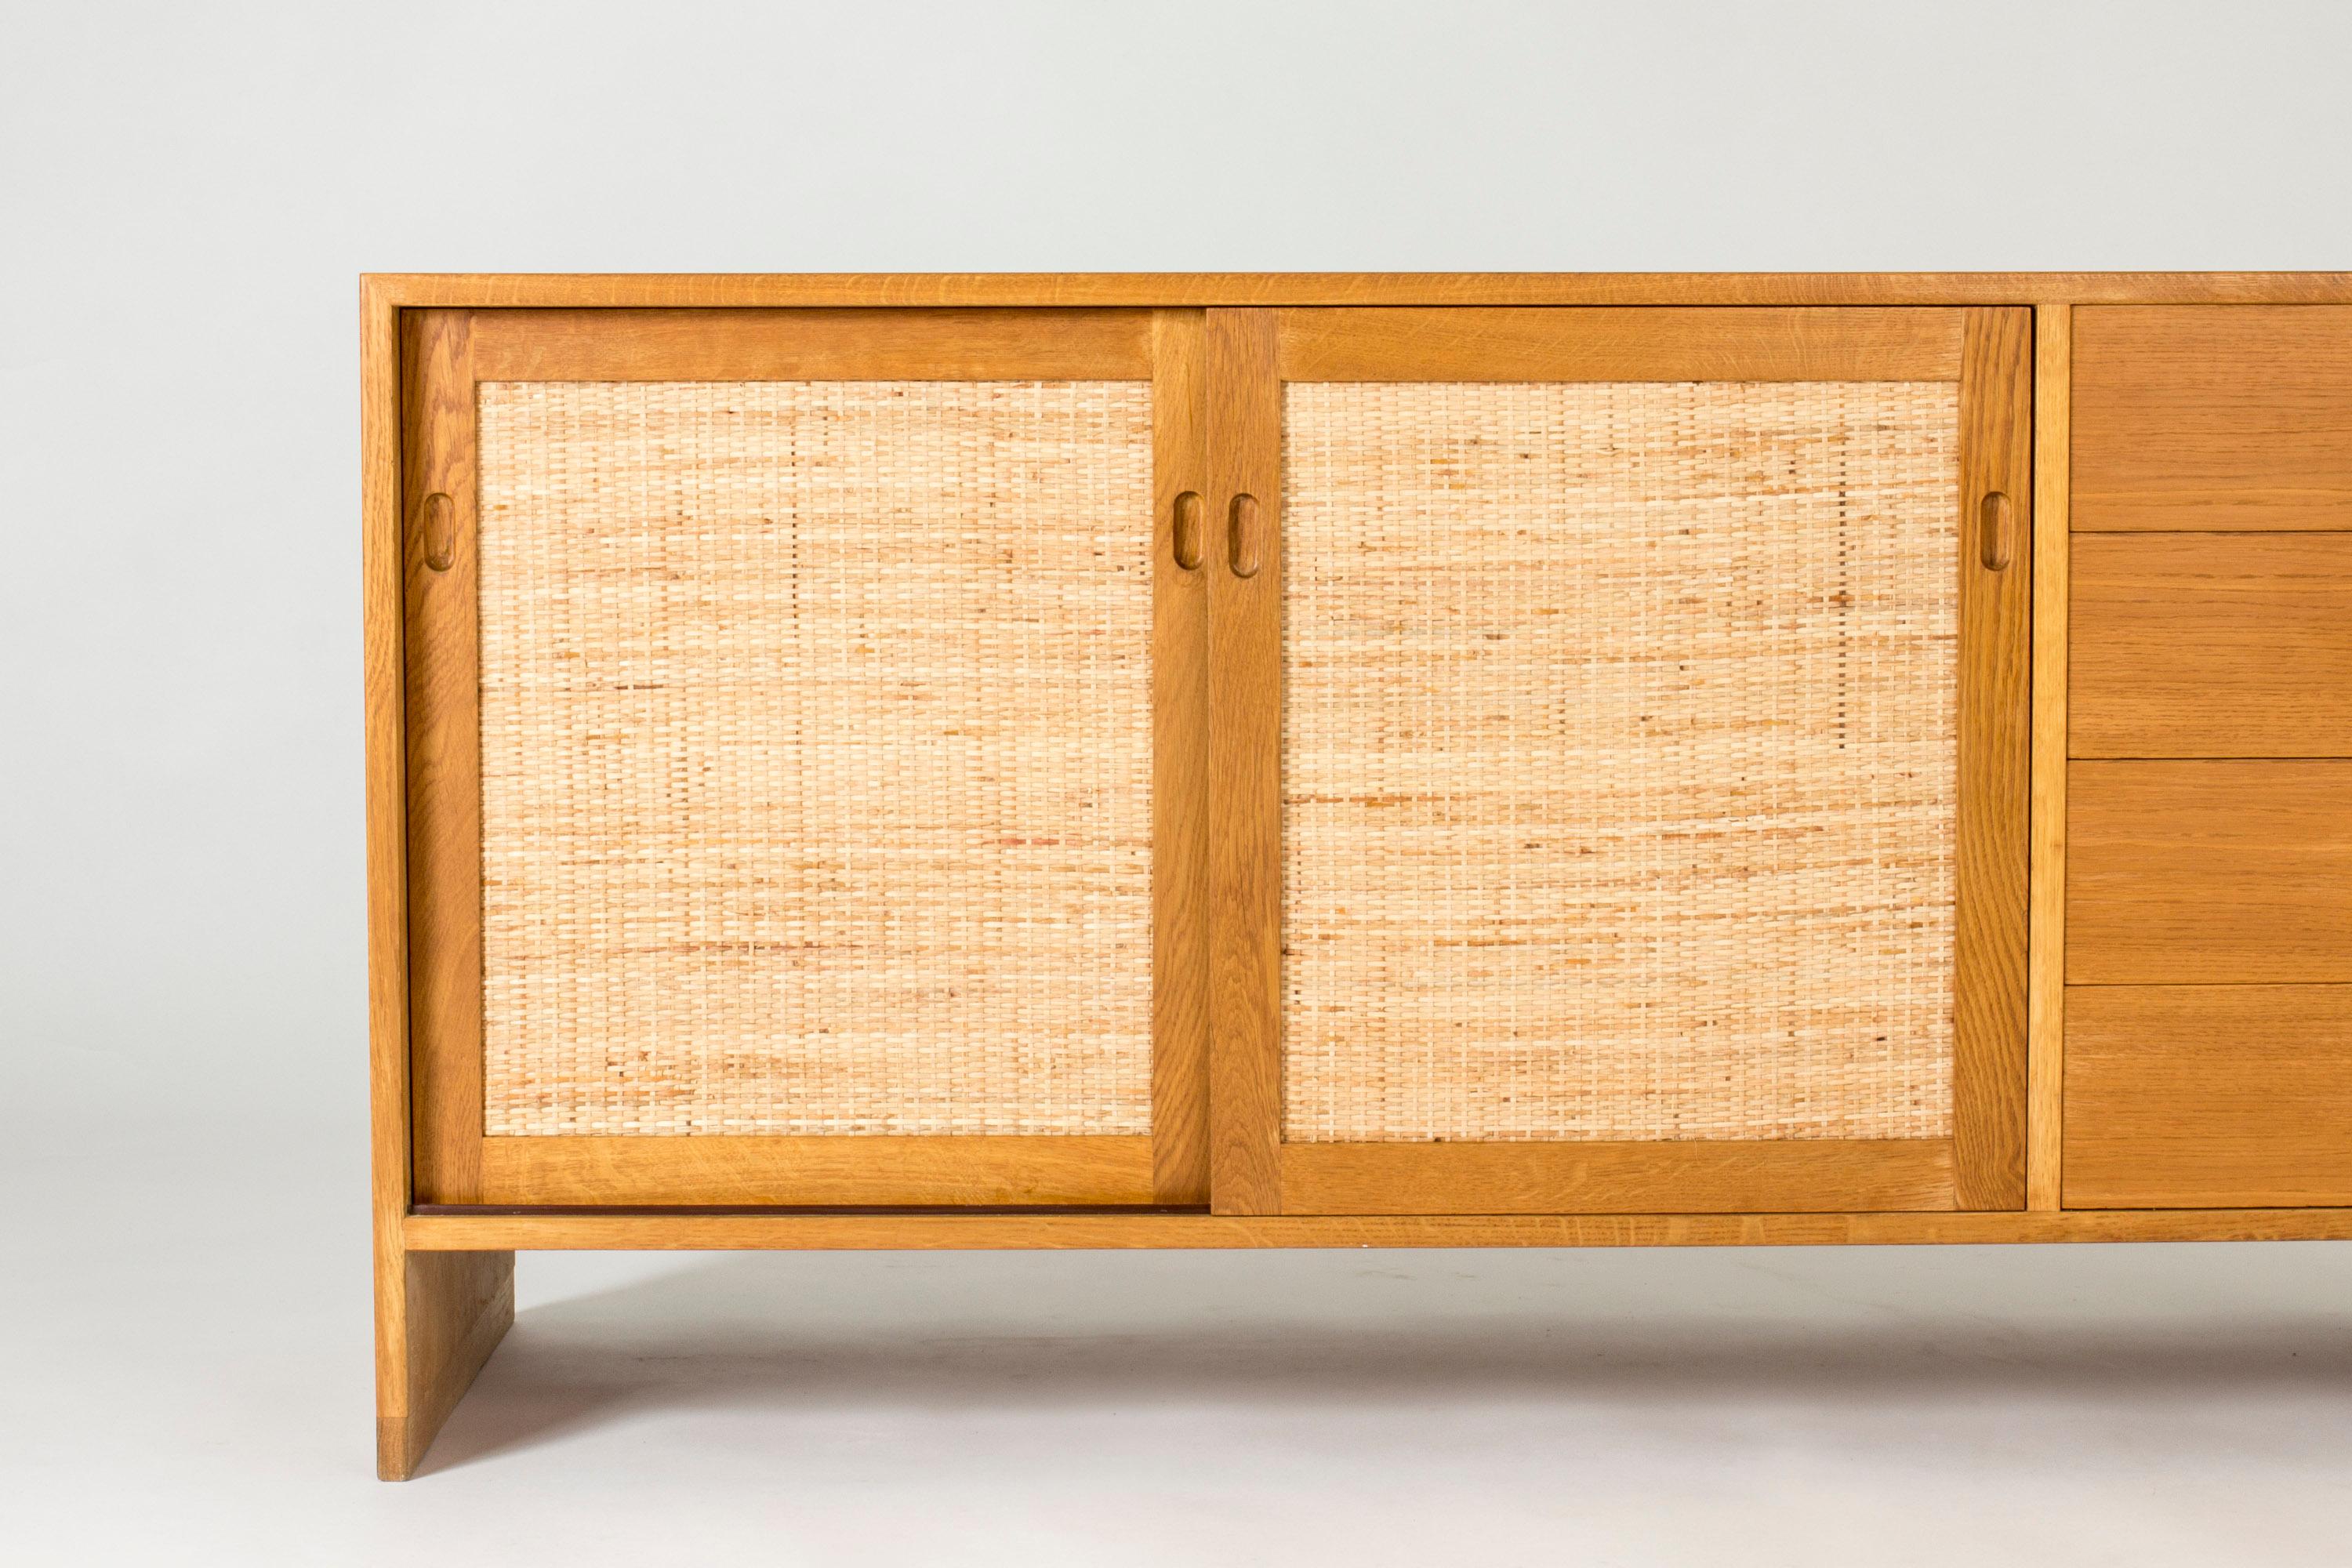 Oak sideboard by Hans J. Wegner, with rattan fronts and sculpted knobs on the drawers. The sides come down to form the legs, and give the sideboard a clean silhouette, contrasted by the round knobs and organic rattan.